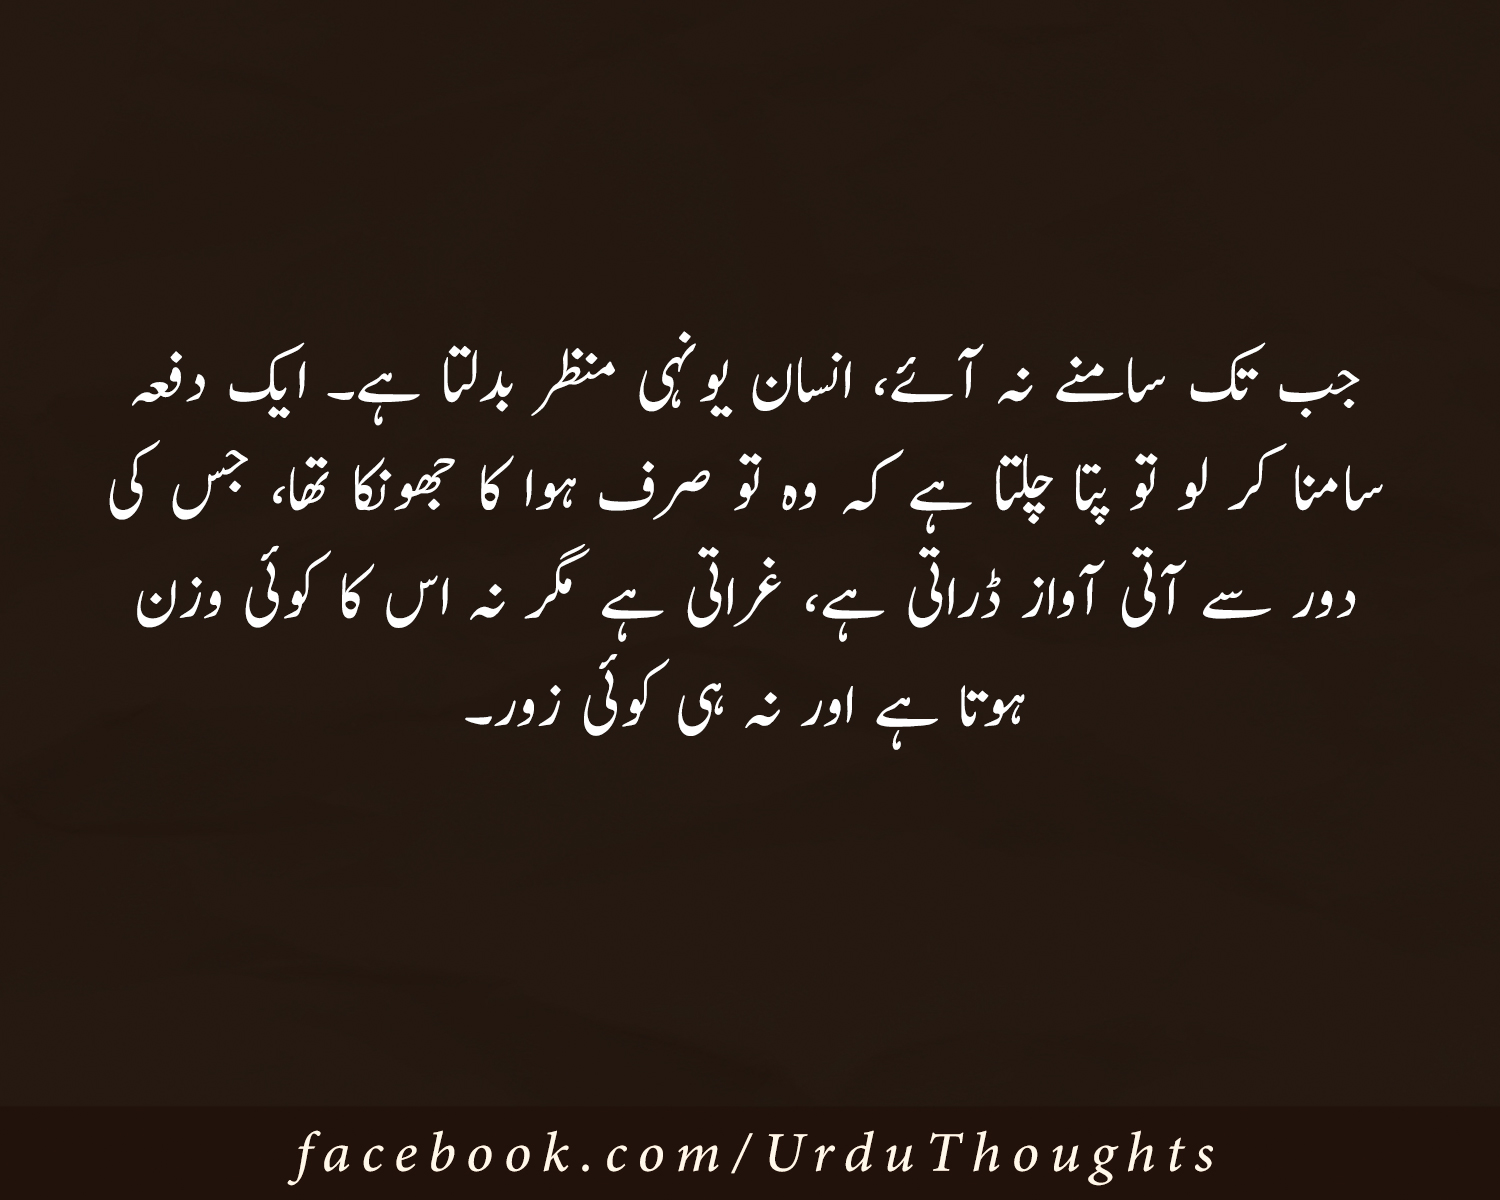 17 Urdu Quotes About Time People Life Zindagi Urdu Thoughts